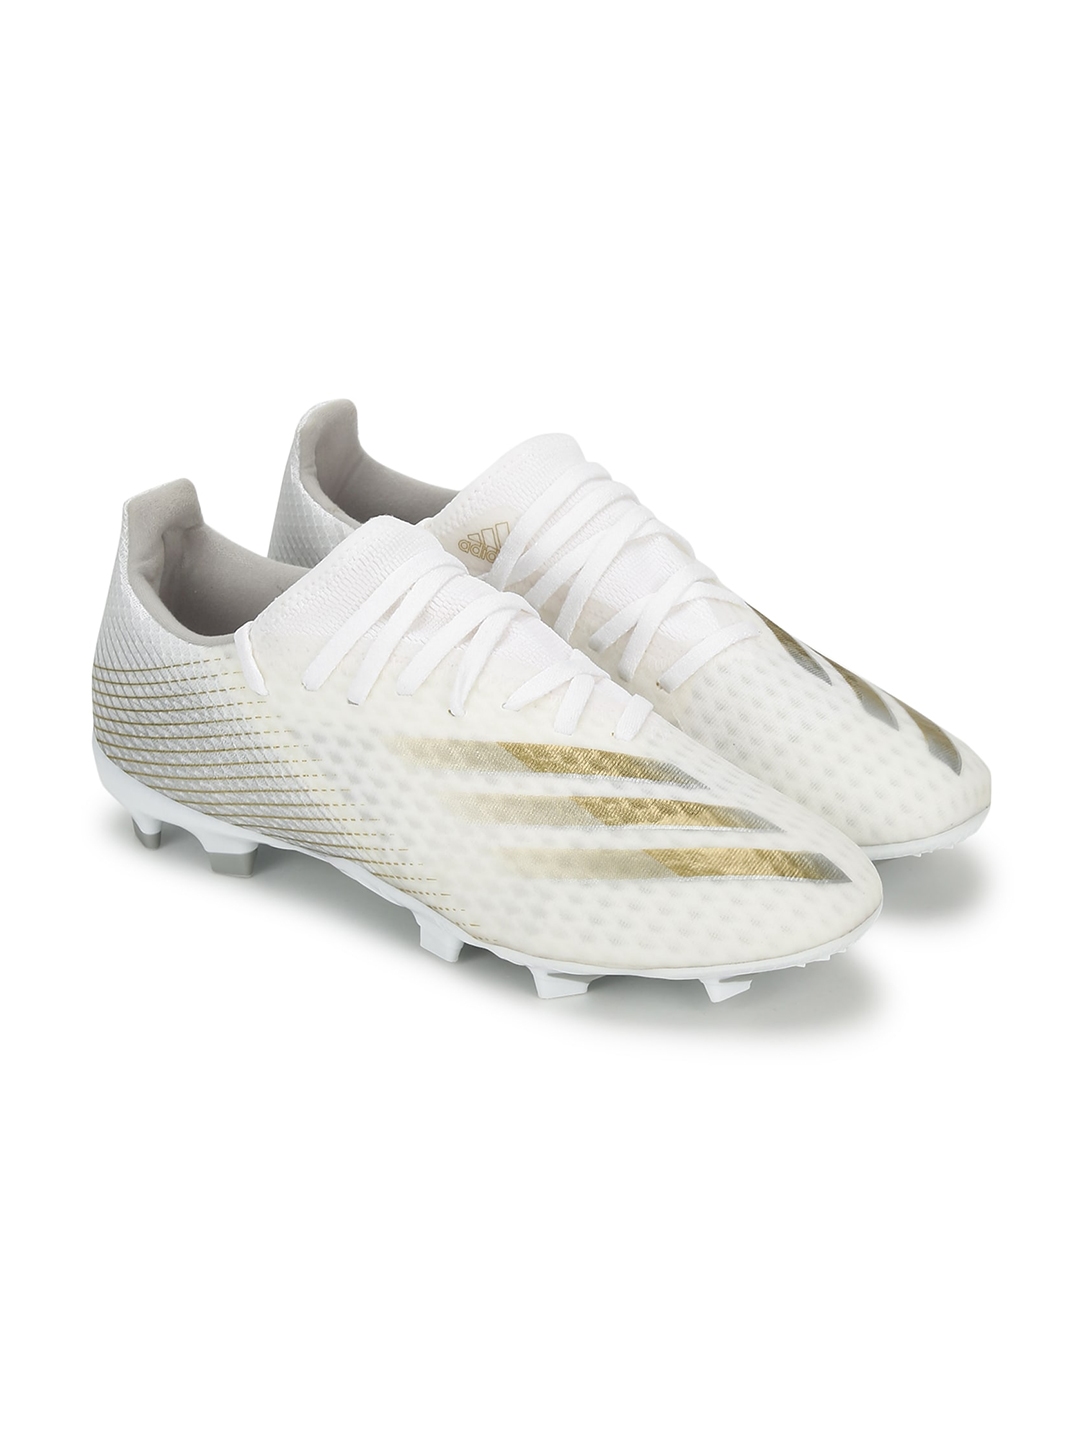 ADIDAS Men White   Gold X GHOSTED.3 FG Football Shoes